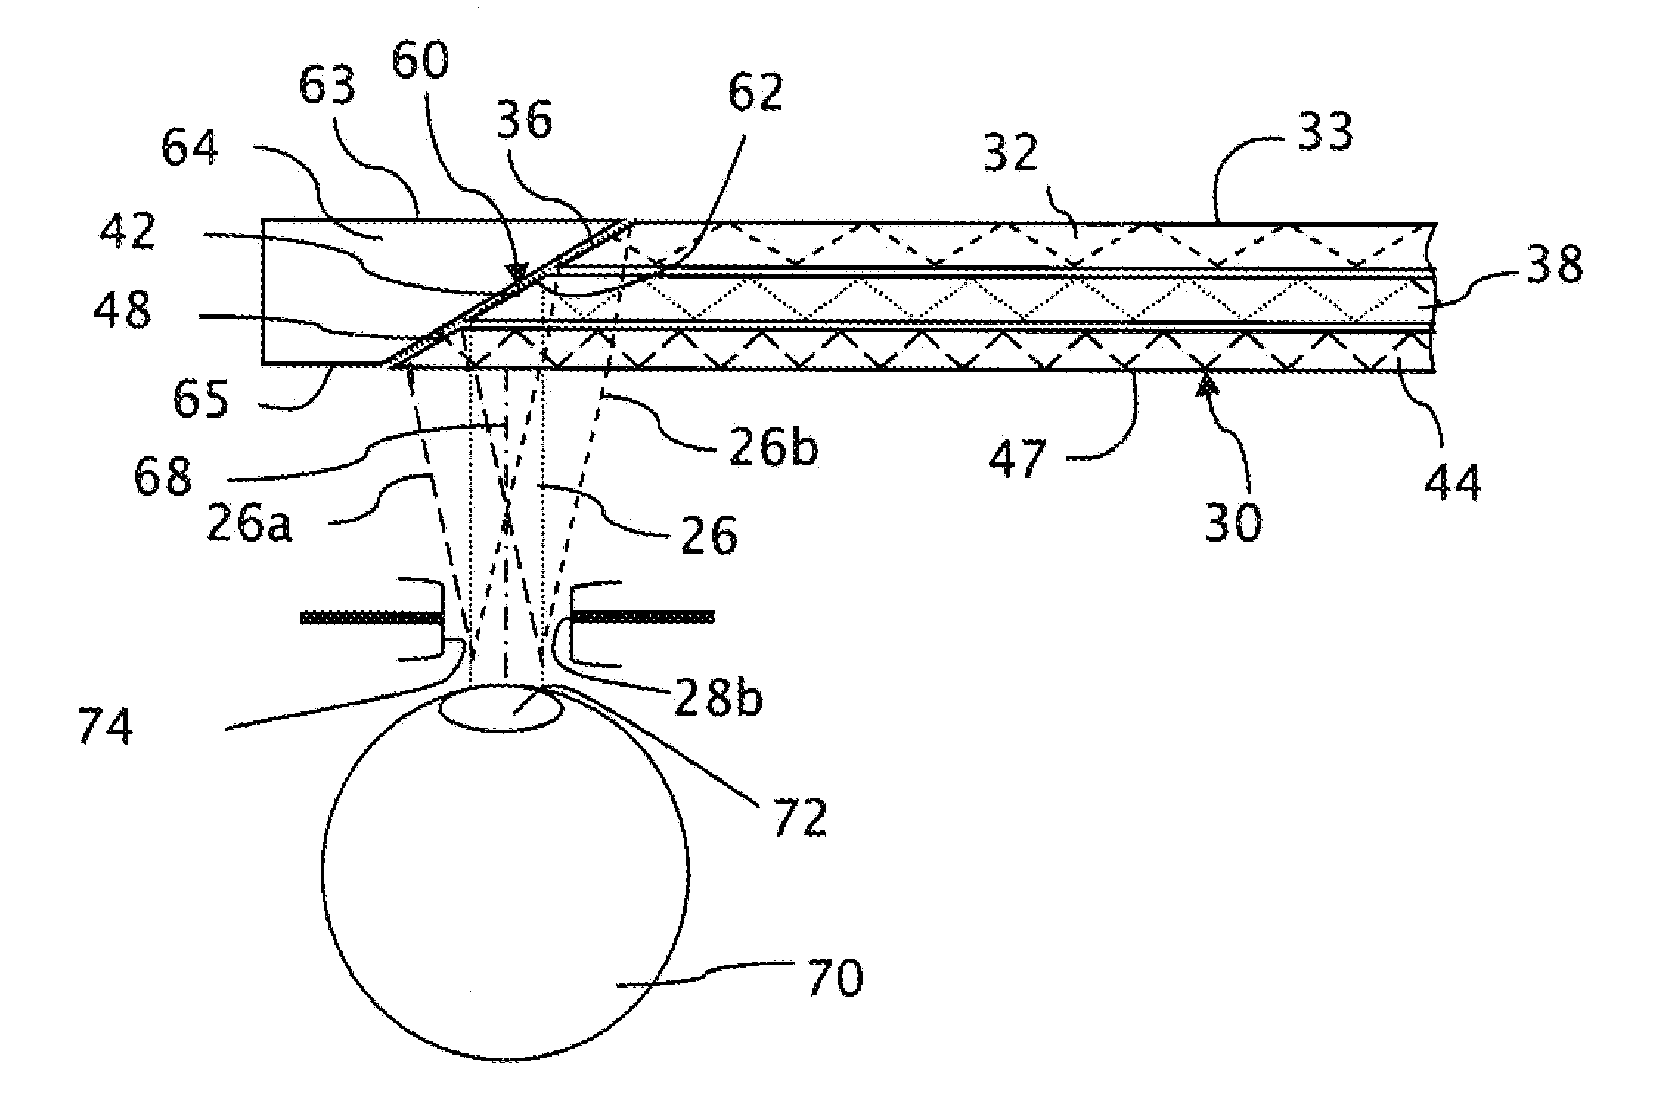 Prismatic multiple waveguide for near-eye display